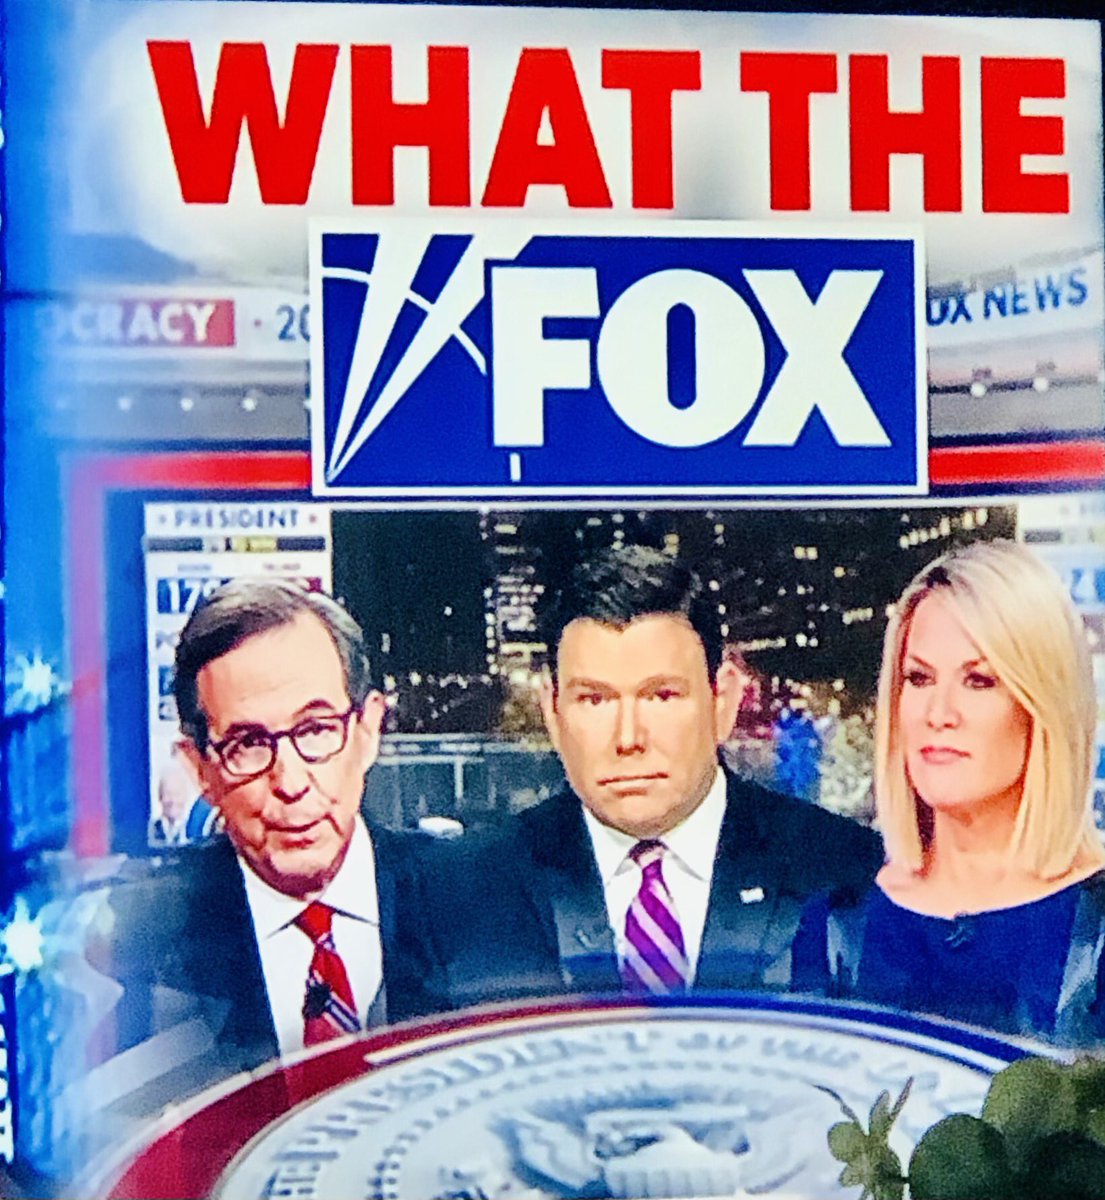 FOX, you are screwed. 
You see, it’s not your so-called narcissistic journalists who made you #1, it was your viewers.  You betrayed us. We are done with Fox. #FOXEXIT #FoxNewsIsDead